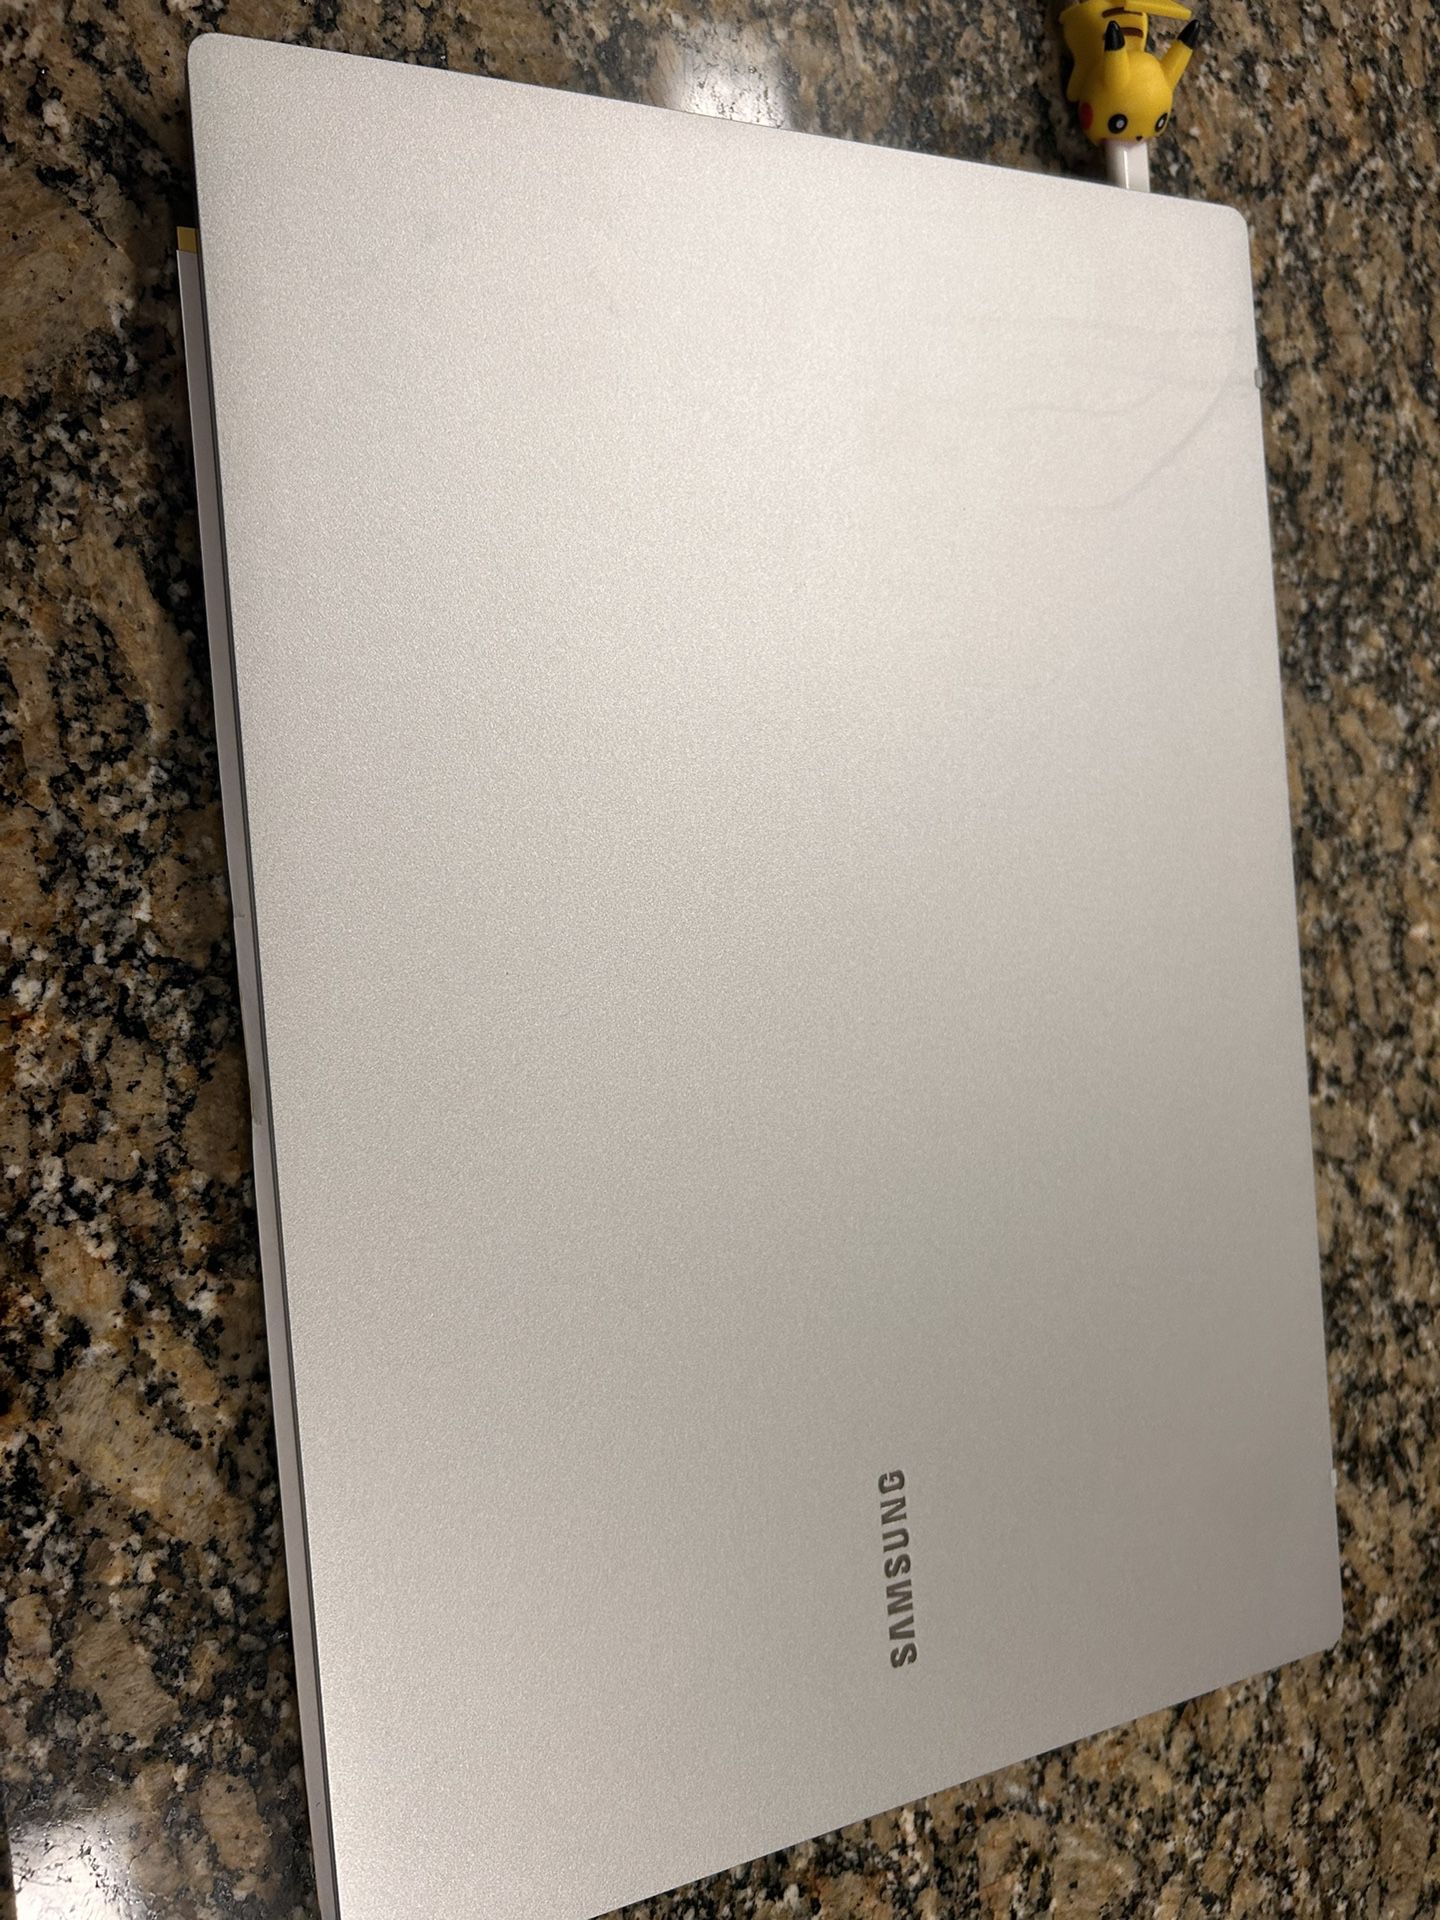 Samsung Galaxy Book - PICK UP ONLY - $200 OBO 